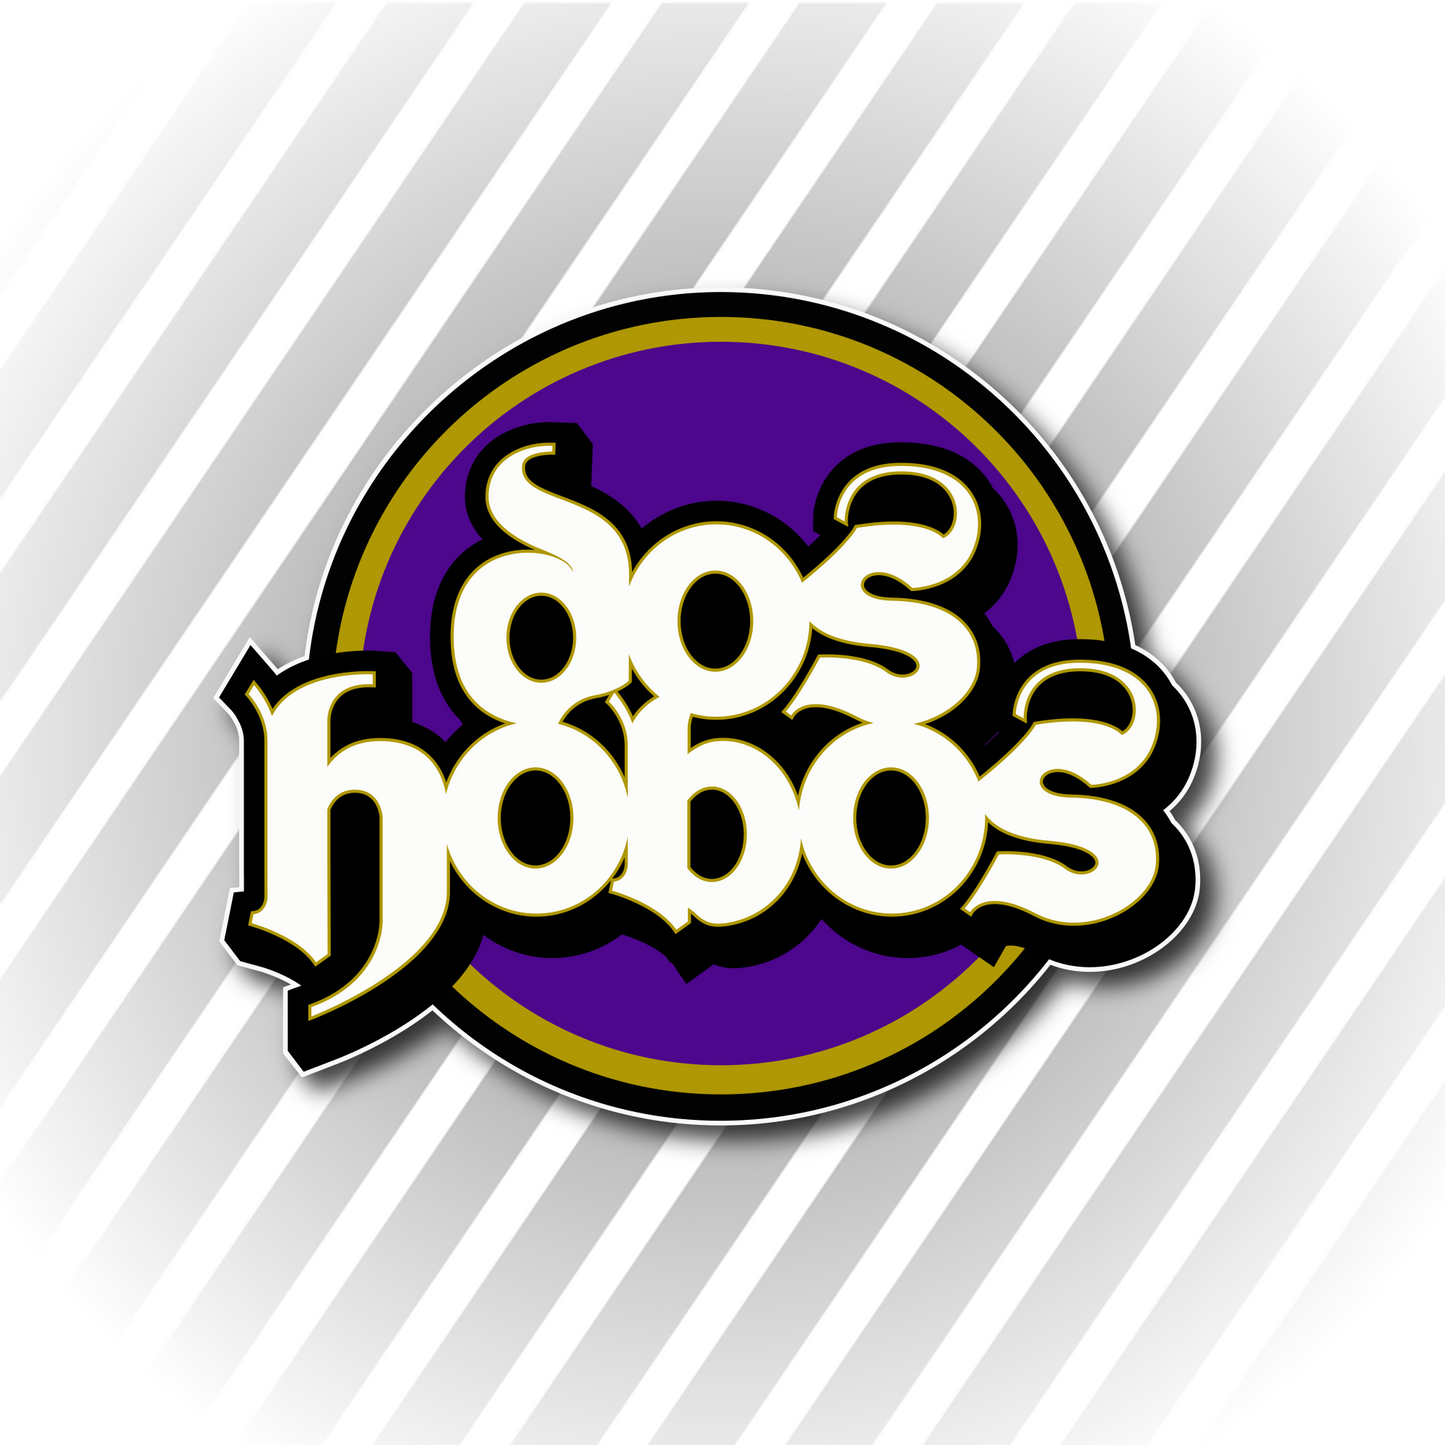 Dos Hobos Decal (Free Decal with Purchase)